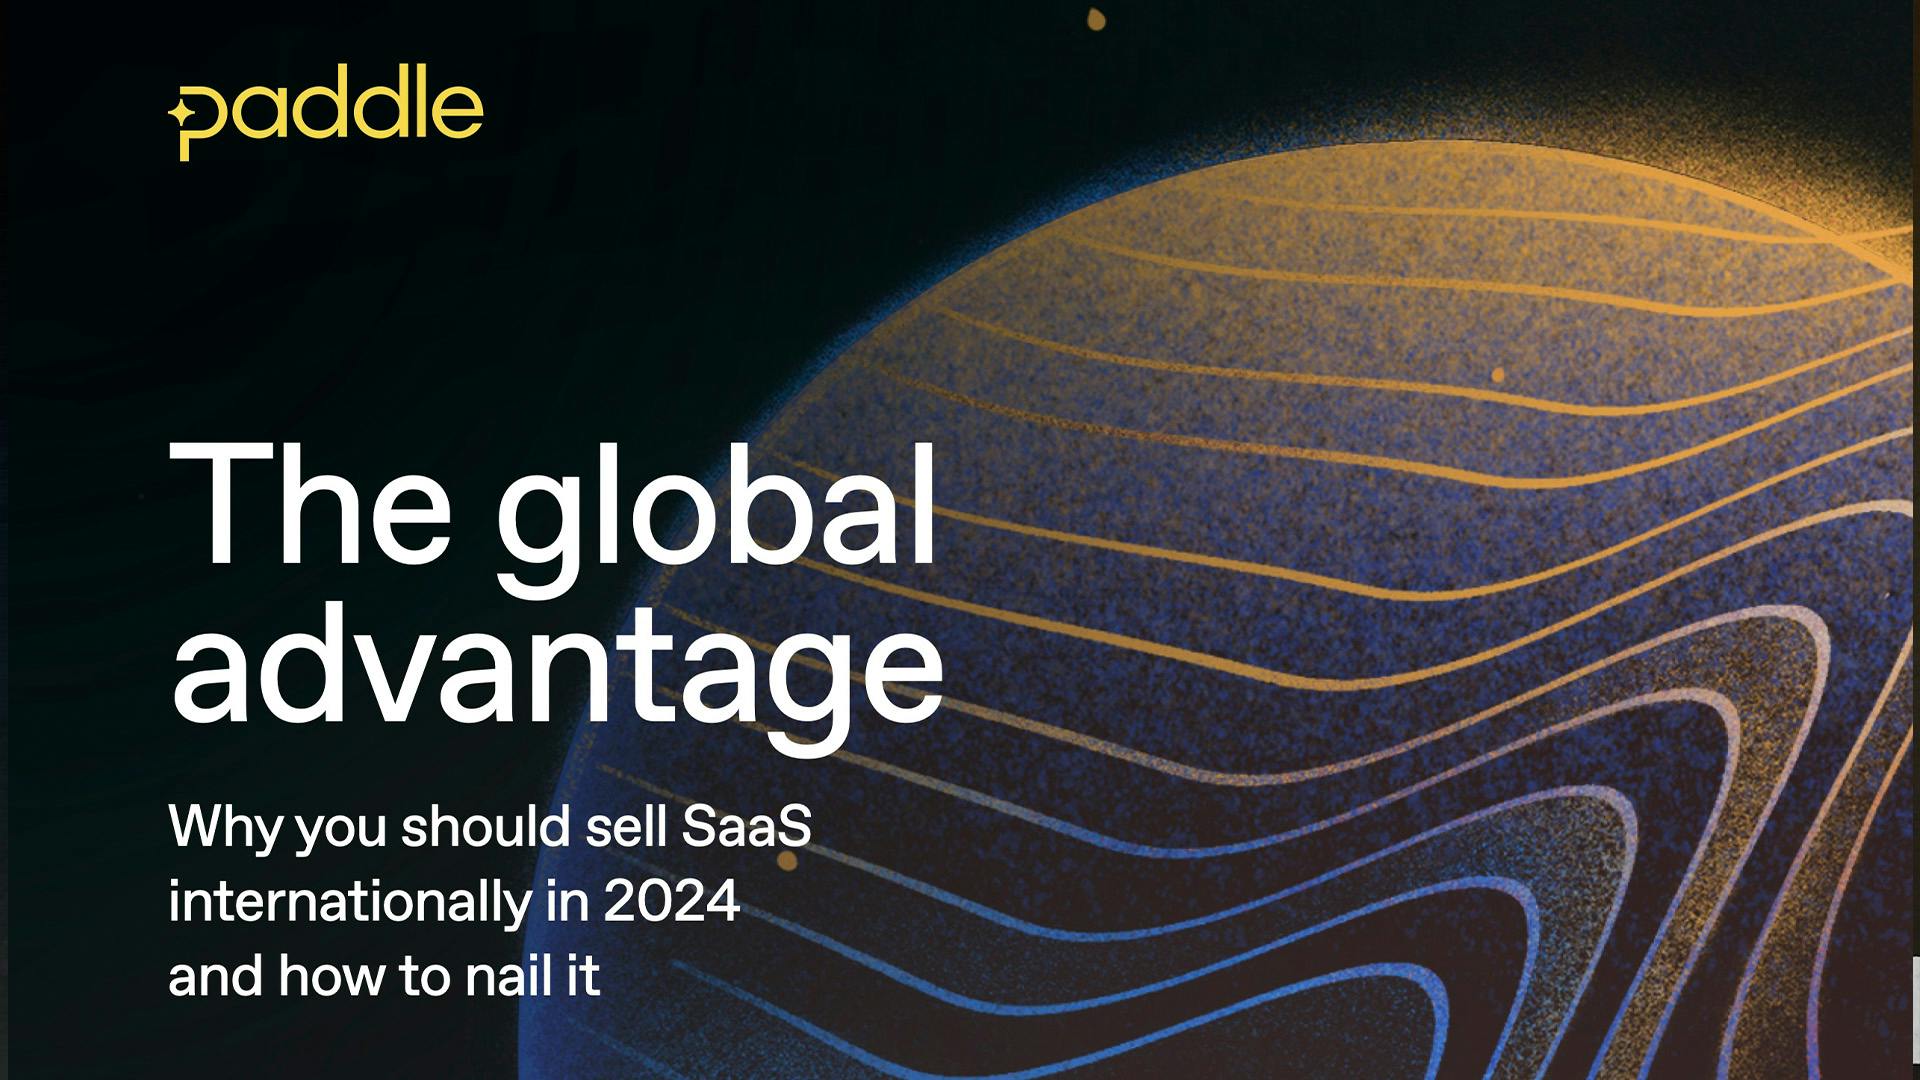 The global advantage: why you should sell SaaS Internationally in 2024 and how to nail it